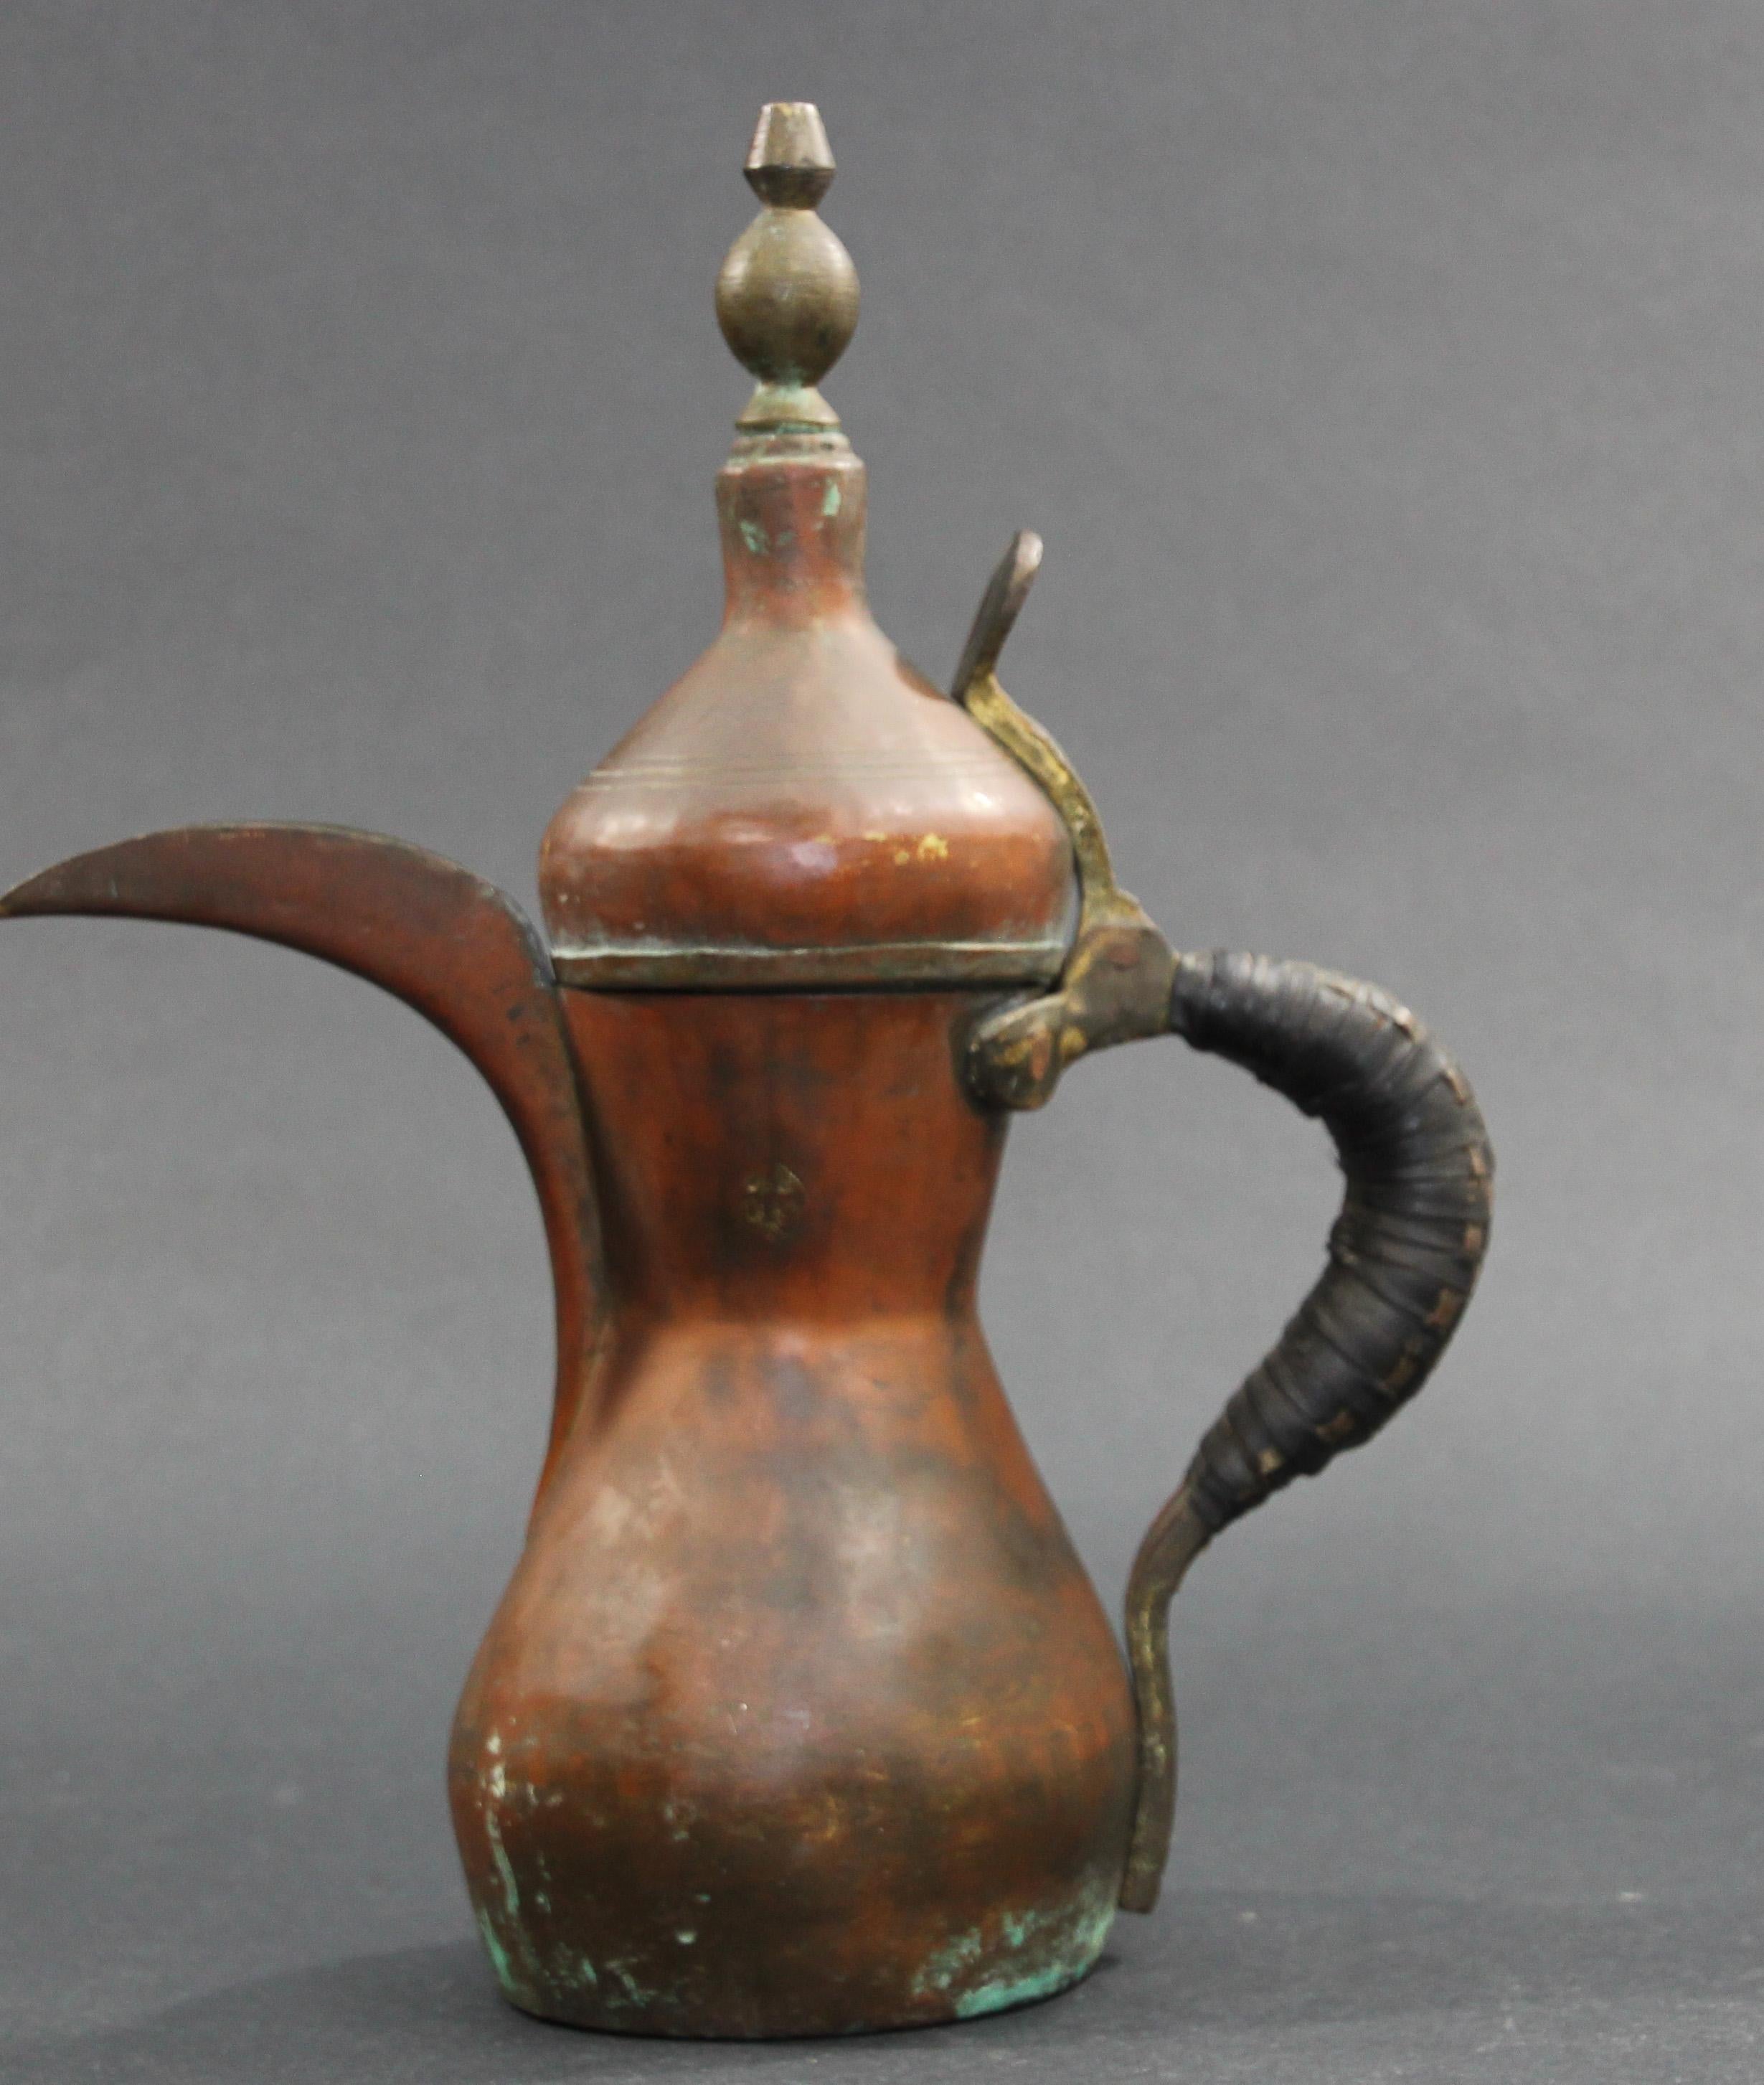 19th century Middle Eastern traditional Arabian tinned copper and brass Dallah coffee pot. 
Moorish Coffee pot hand-hammered copper with riveted brass finish and a very large spout. 
The handle is covered with leather.
Size: 12